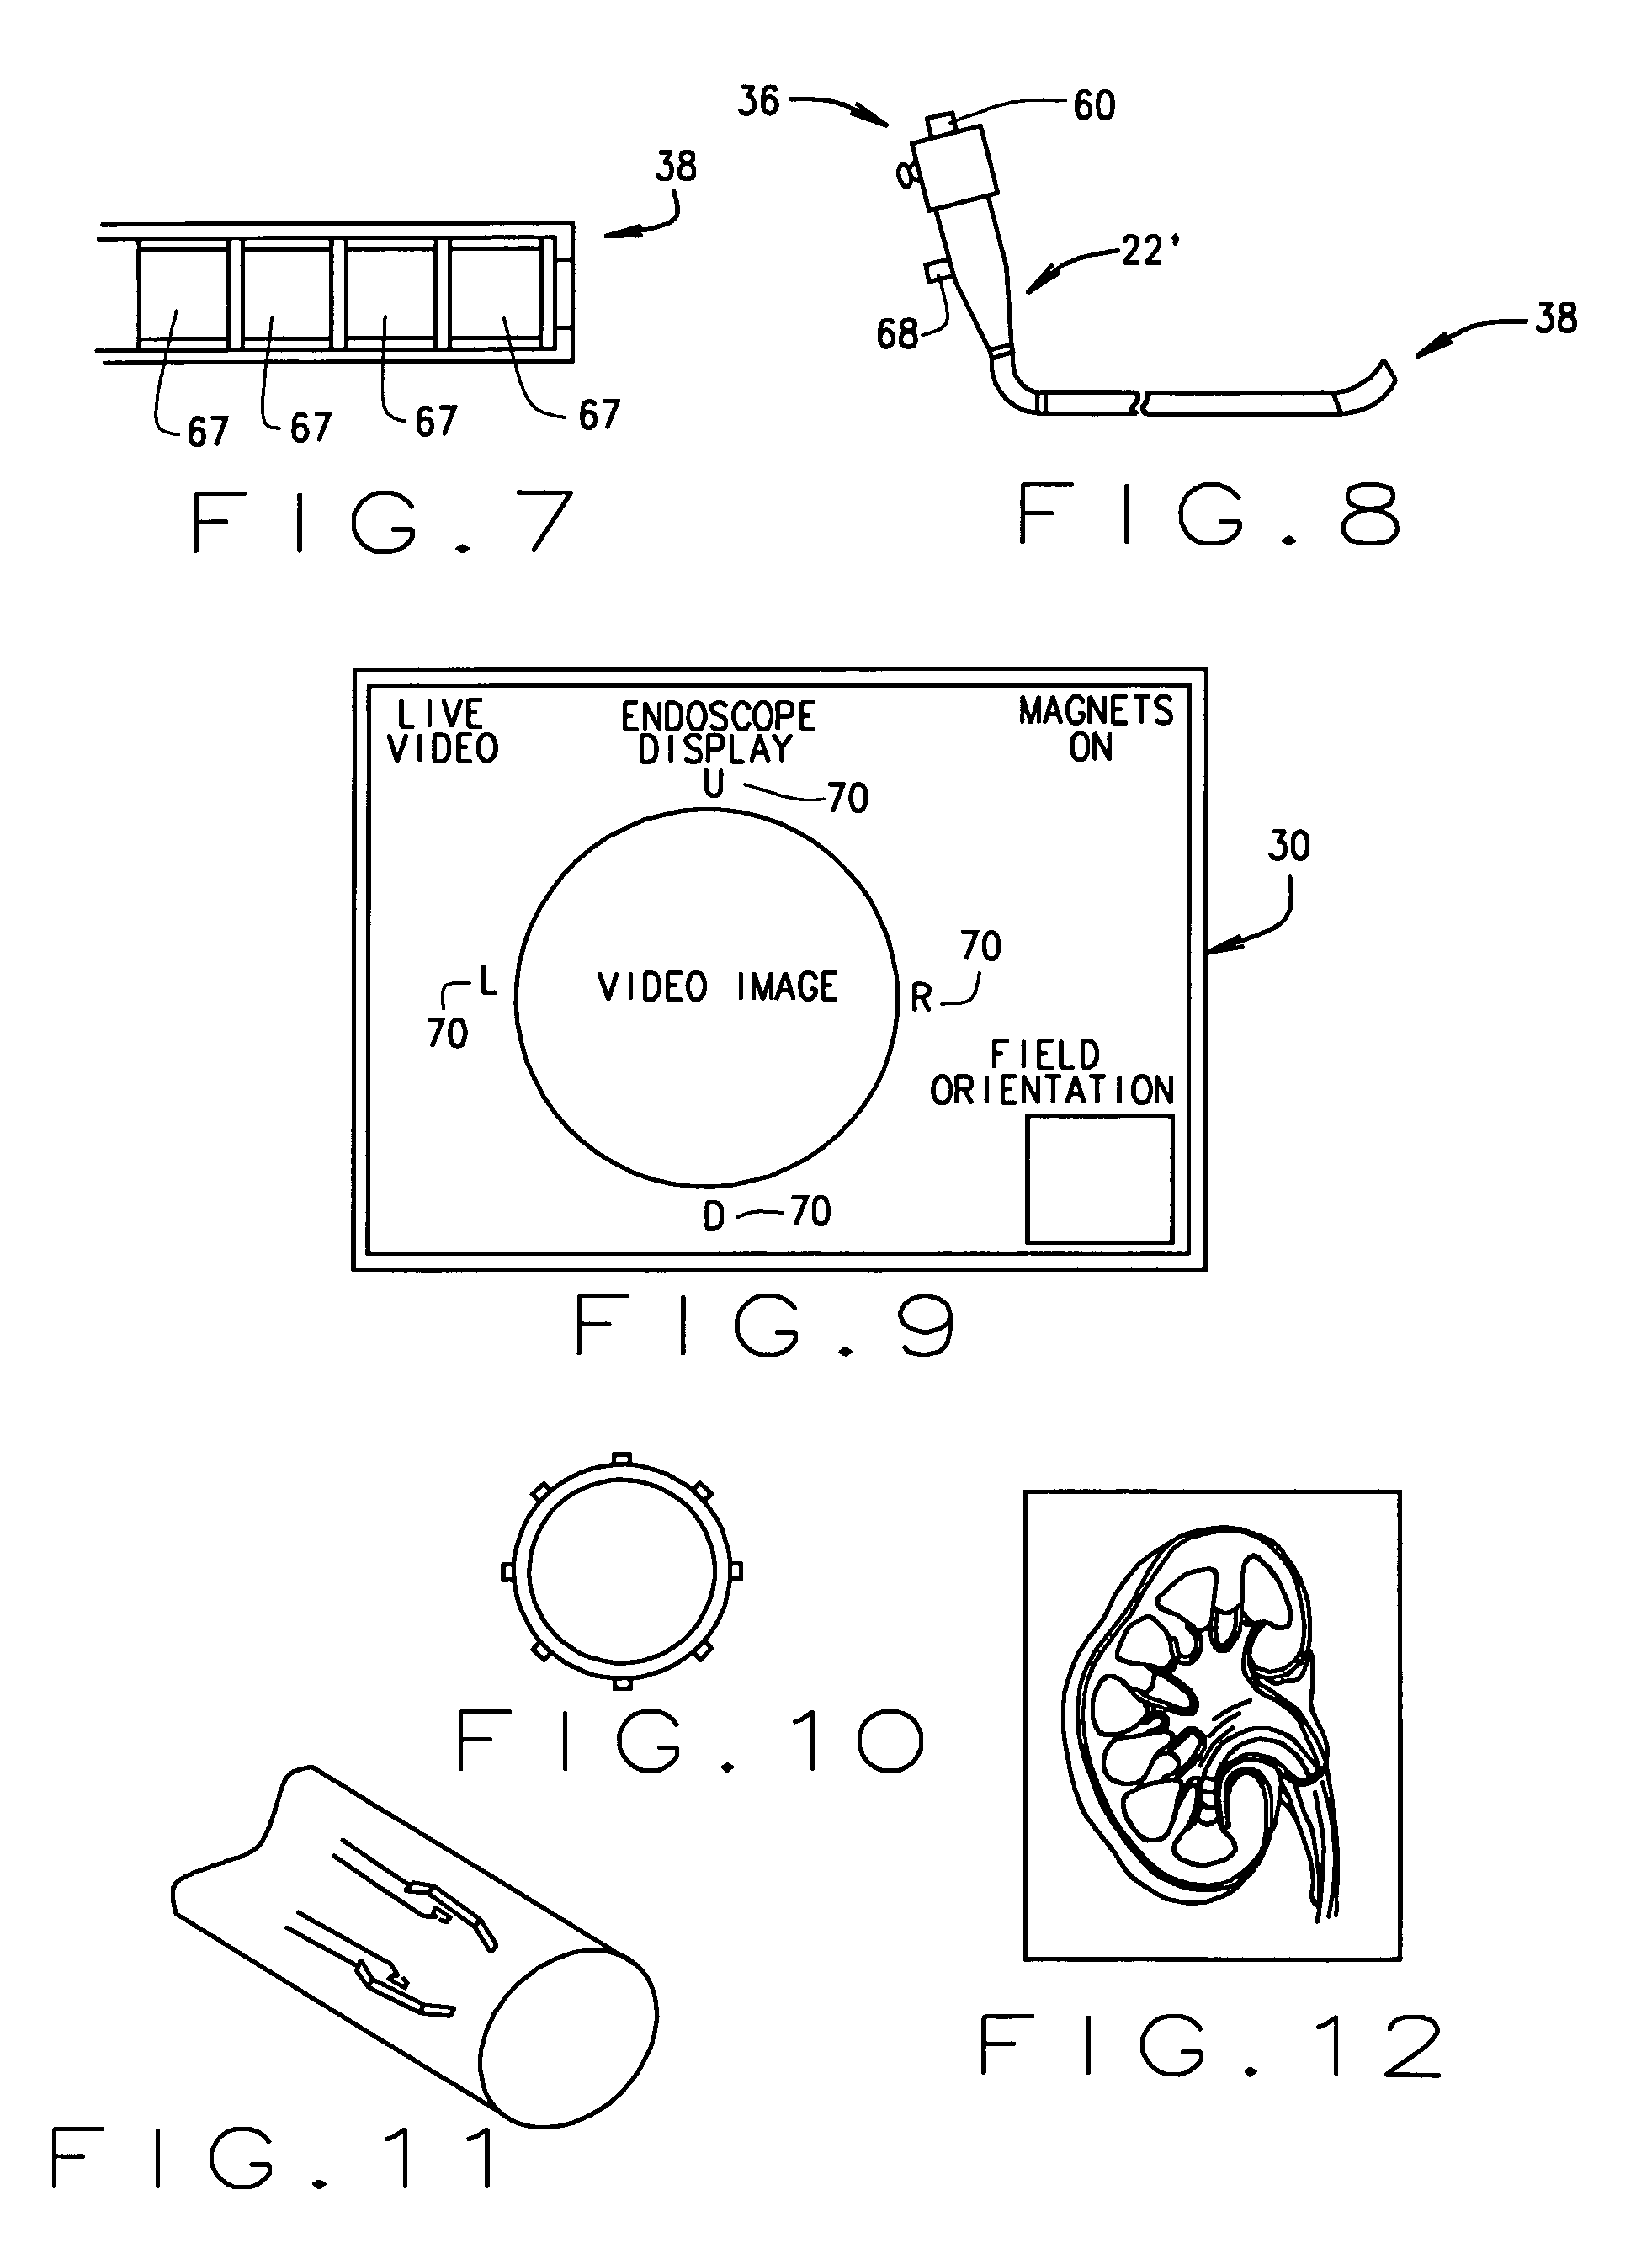 Method and apparatus for magnetically controlling endoscopes in body lumens and cavities